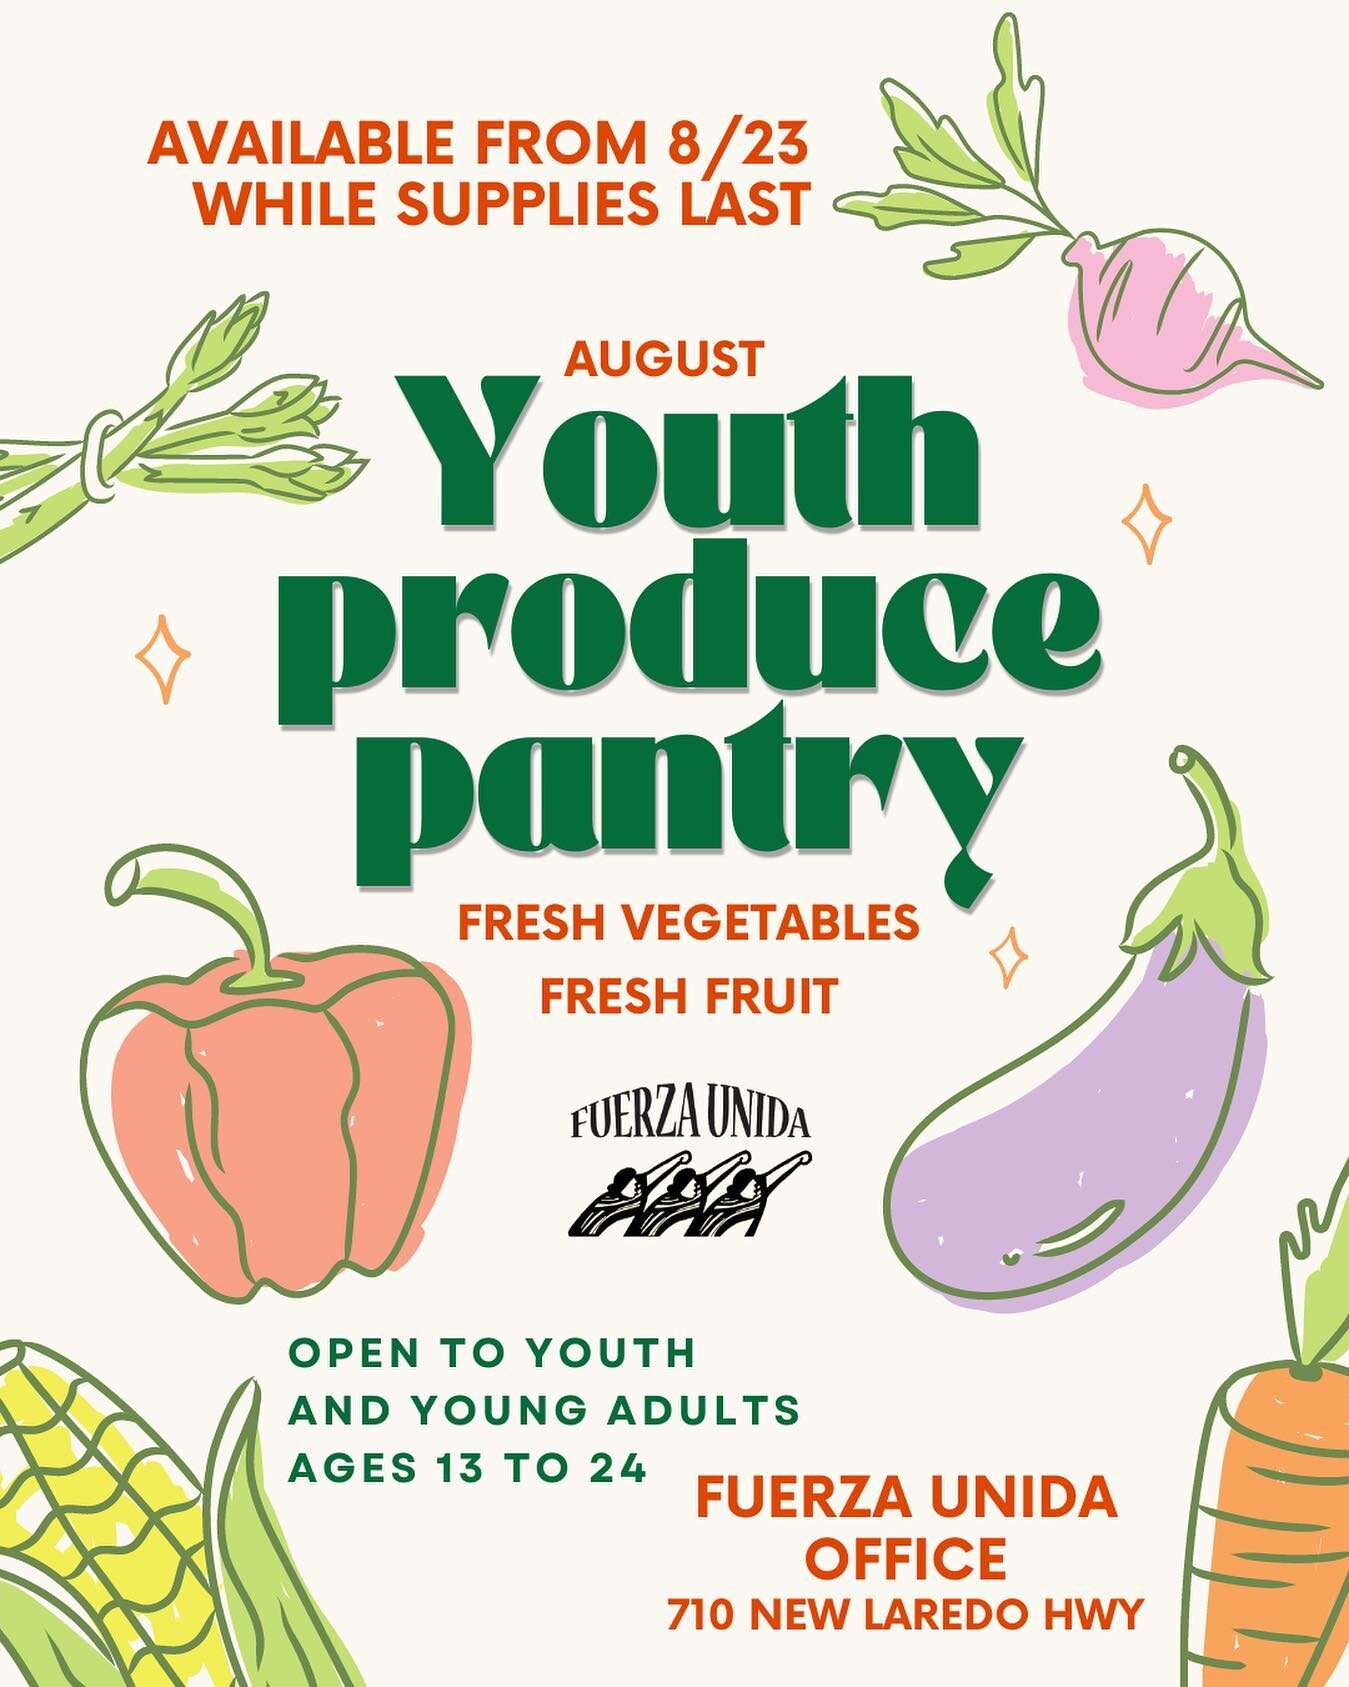 Are you between the ages of 13 and 24? Stop by the Fuerza Unida office during normal business hours to pick up a bag of fresh produce! Available now through the rest of the week while supplies last.
Anyone can get a bag, just sign in when you get her